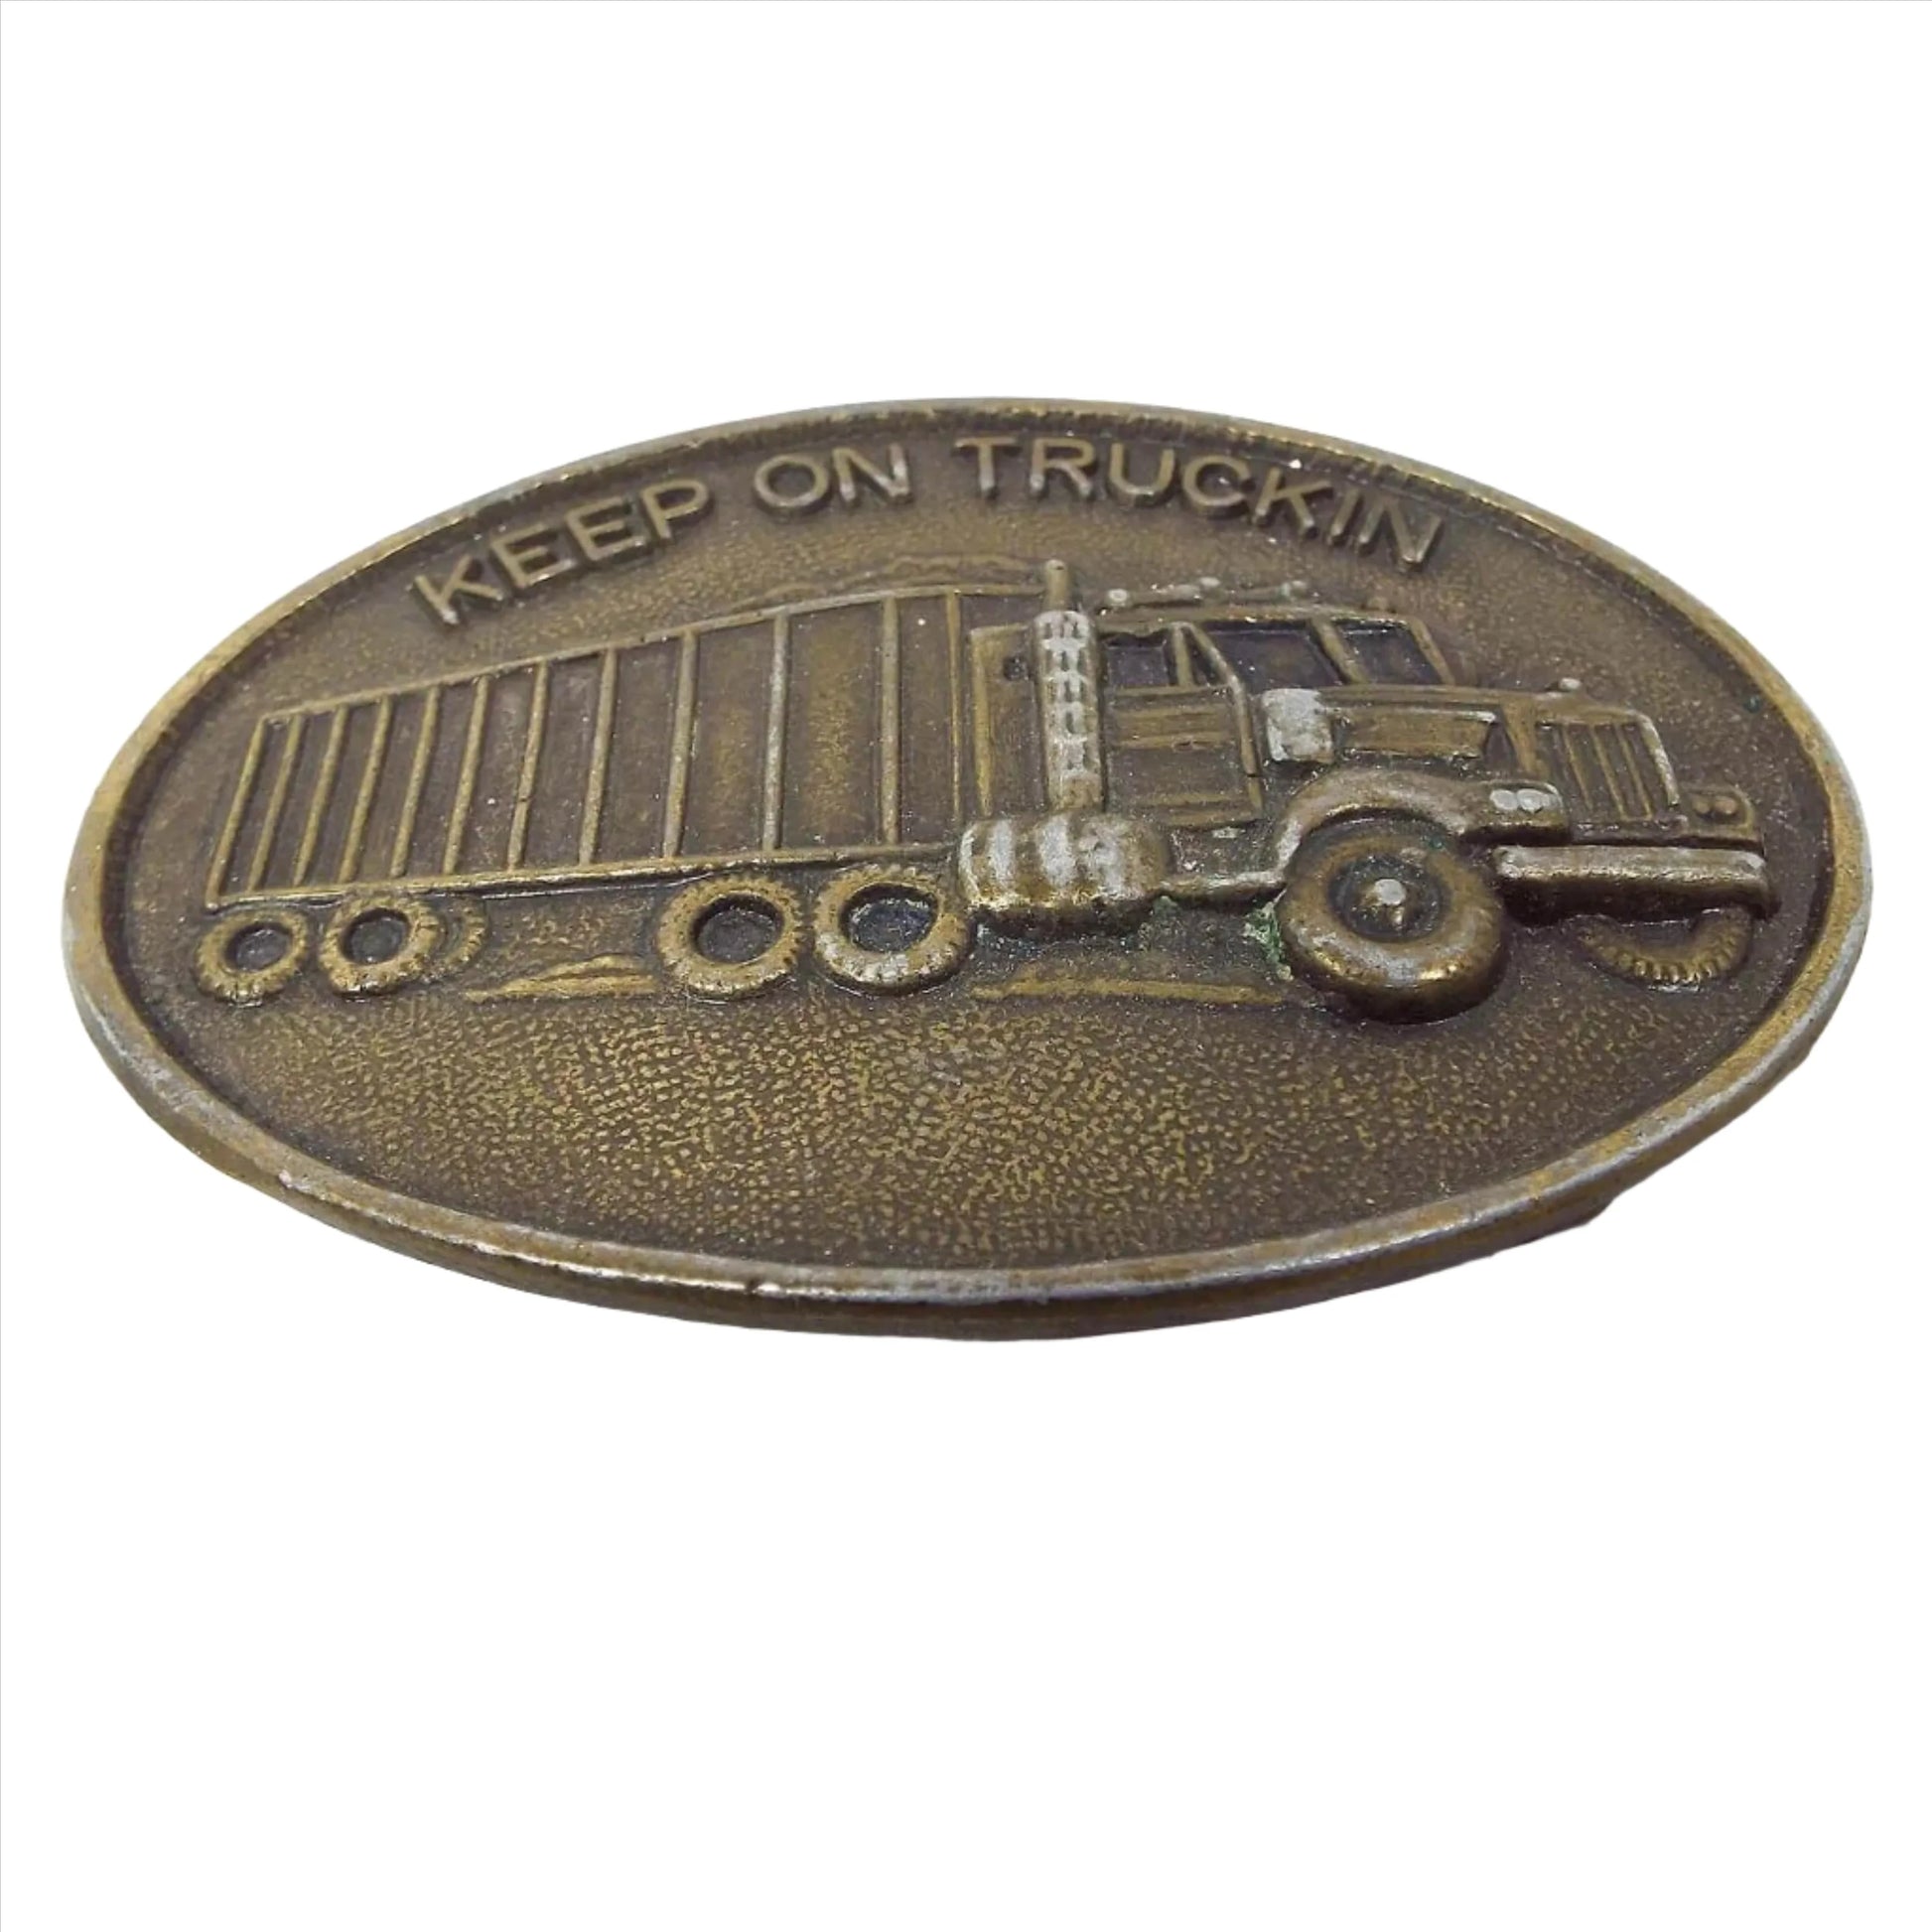 Front view of the retro vintage trucker's belt buckle. It is oval and antiqued brass in color. It says Keep on Truckin on the top and has a semi with trailer on it. There are some scuffs on the front of the truck area.